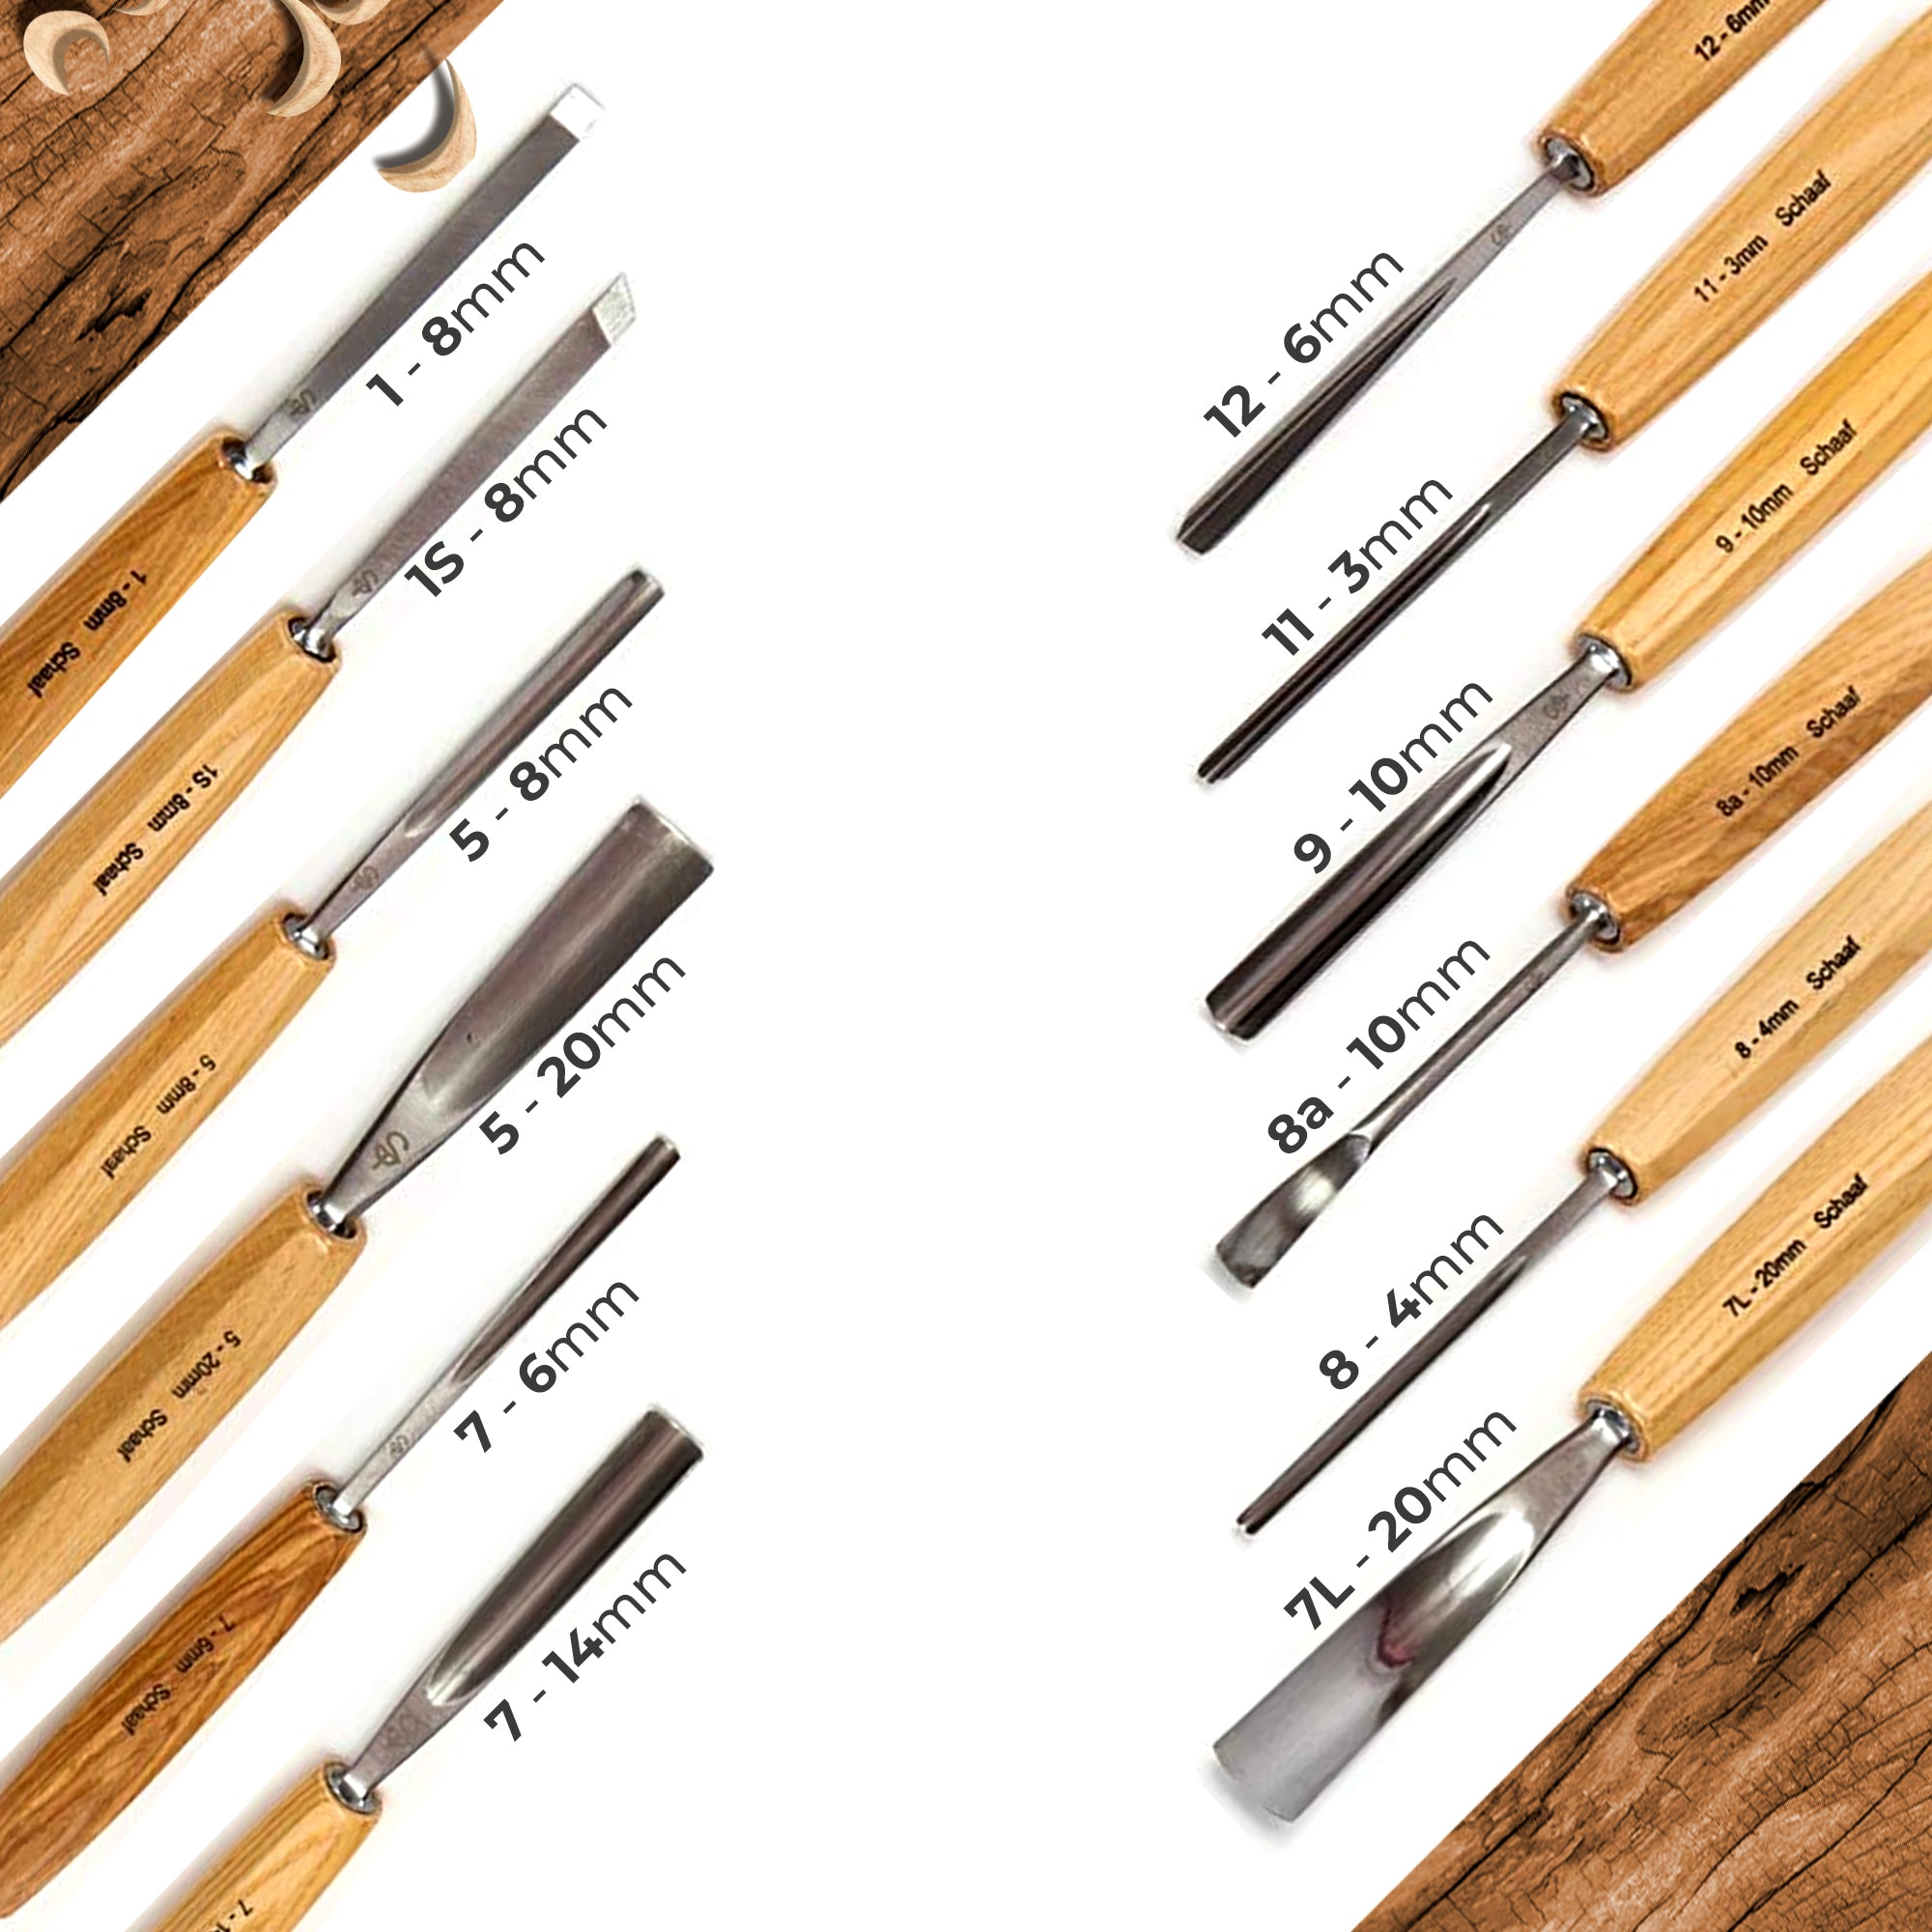 Professionally Hand Sharpened - 12-Piece Foundation Wood Carving Set – Best Choice for Beginners